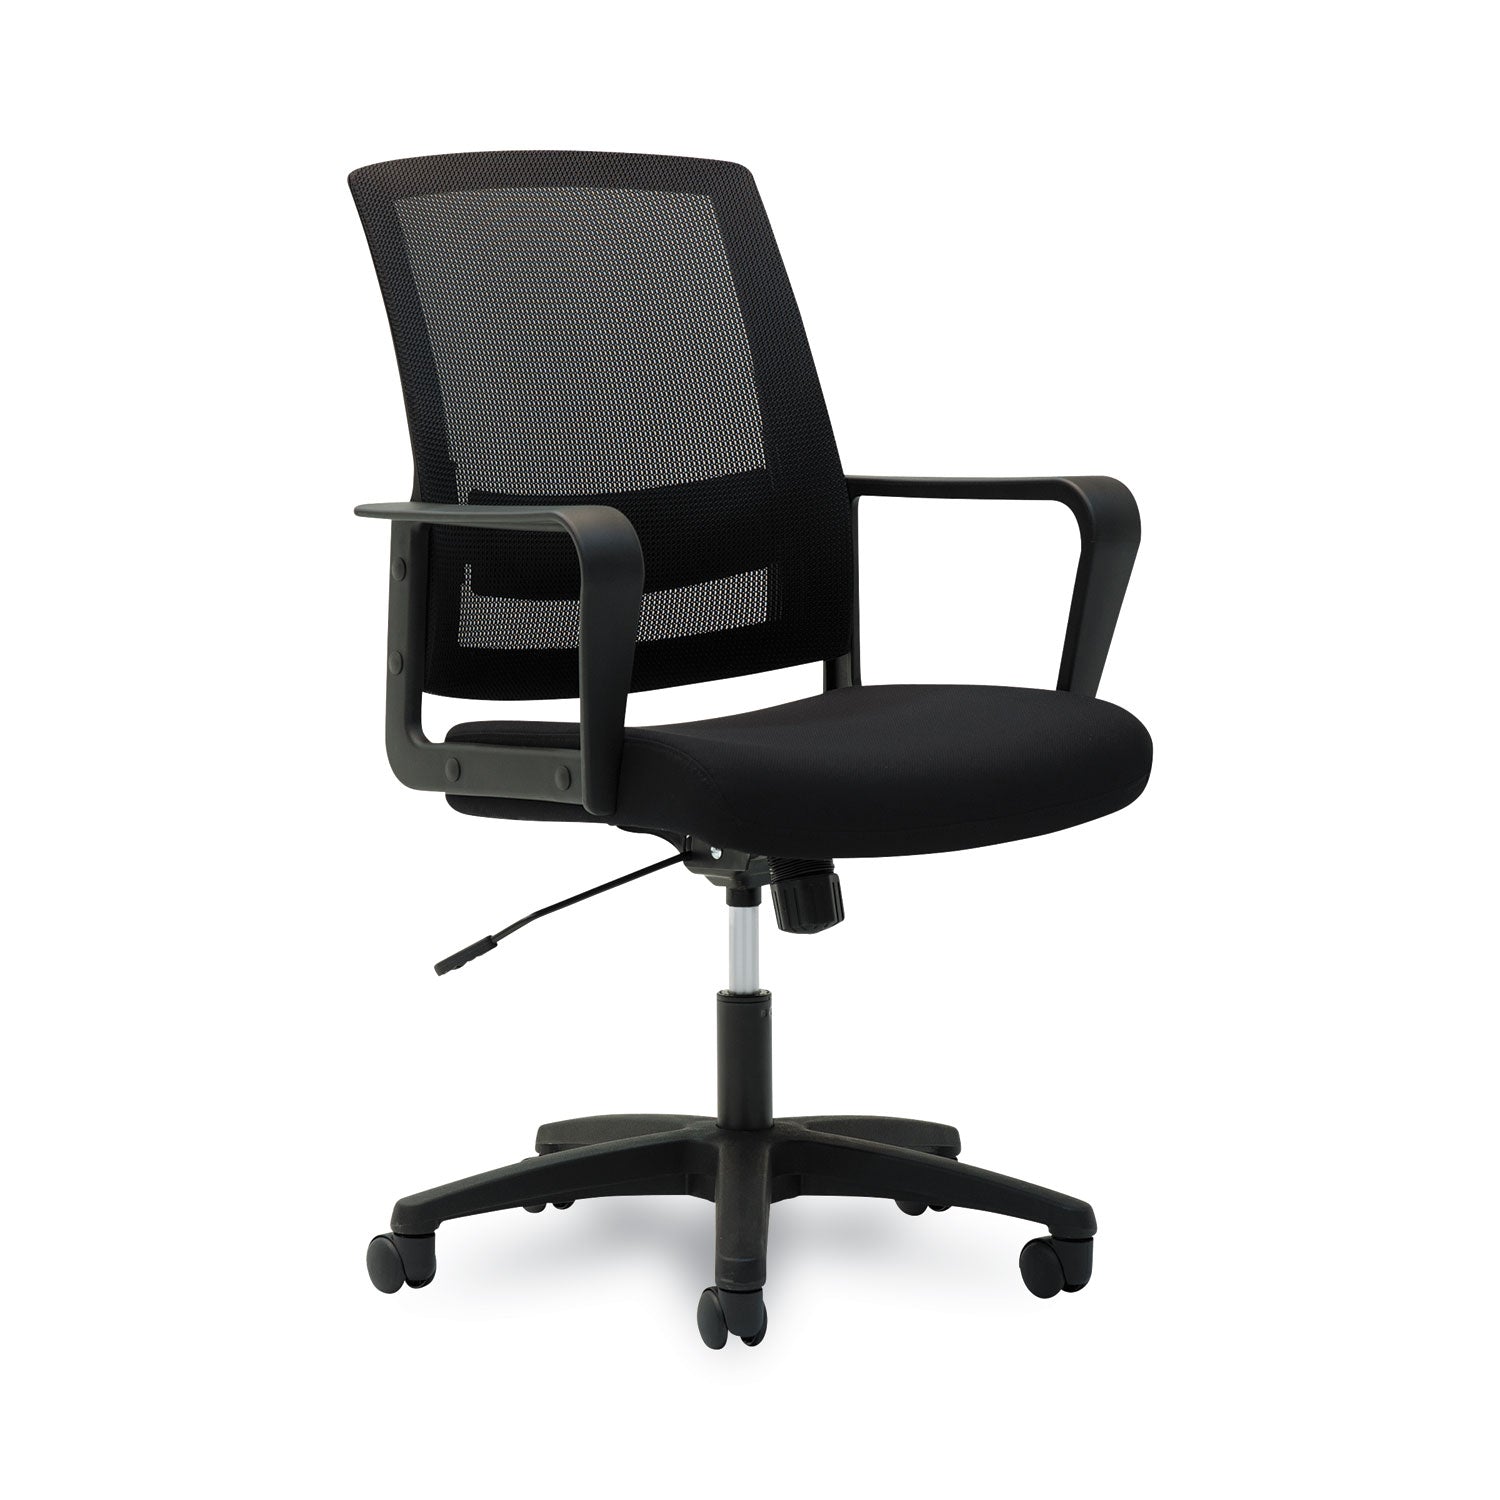 mesh-mid-back-chair-supports-up-to-225-lb-17-to-215-seat-height-black_oifms4217 - 2